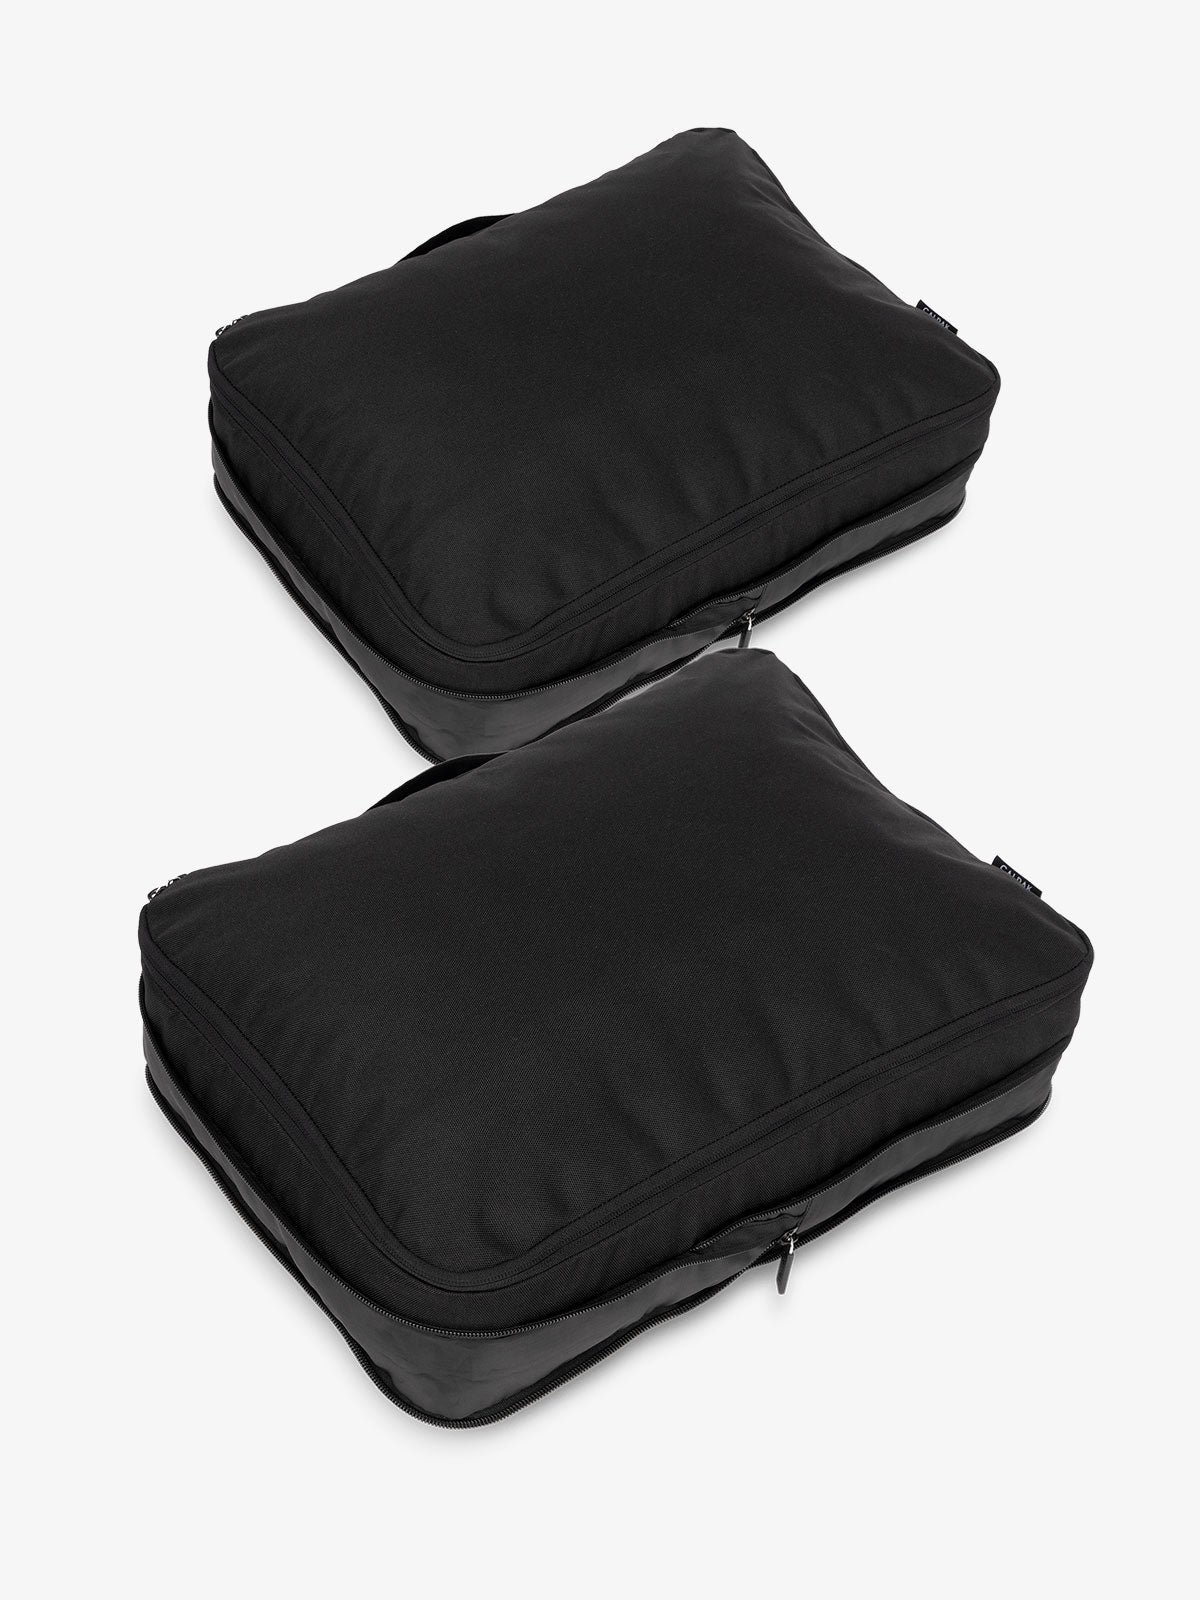 CALPAK large packing cubes with top handles and expandable by 4.5 inches in black